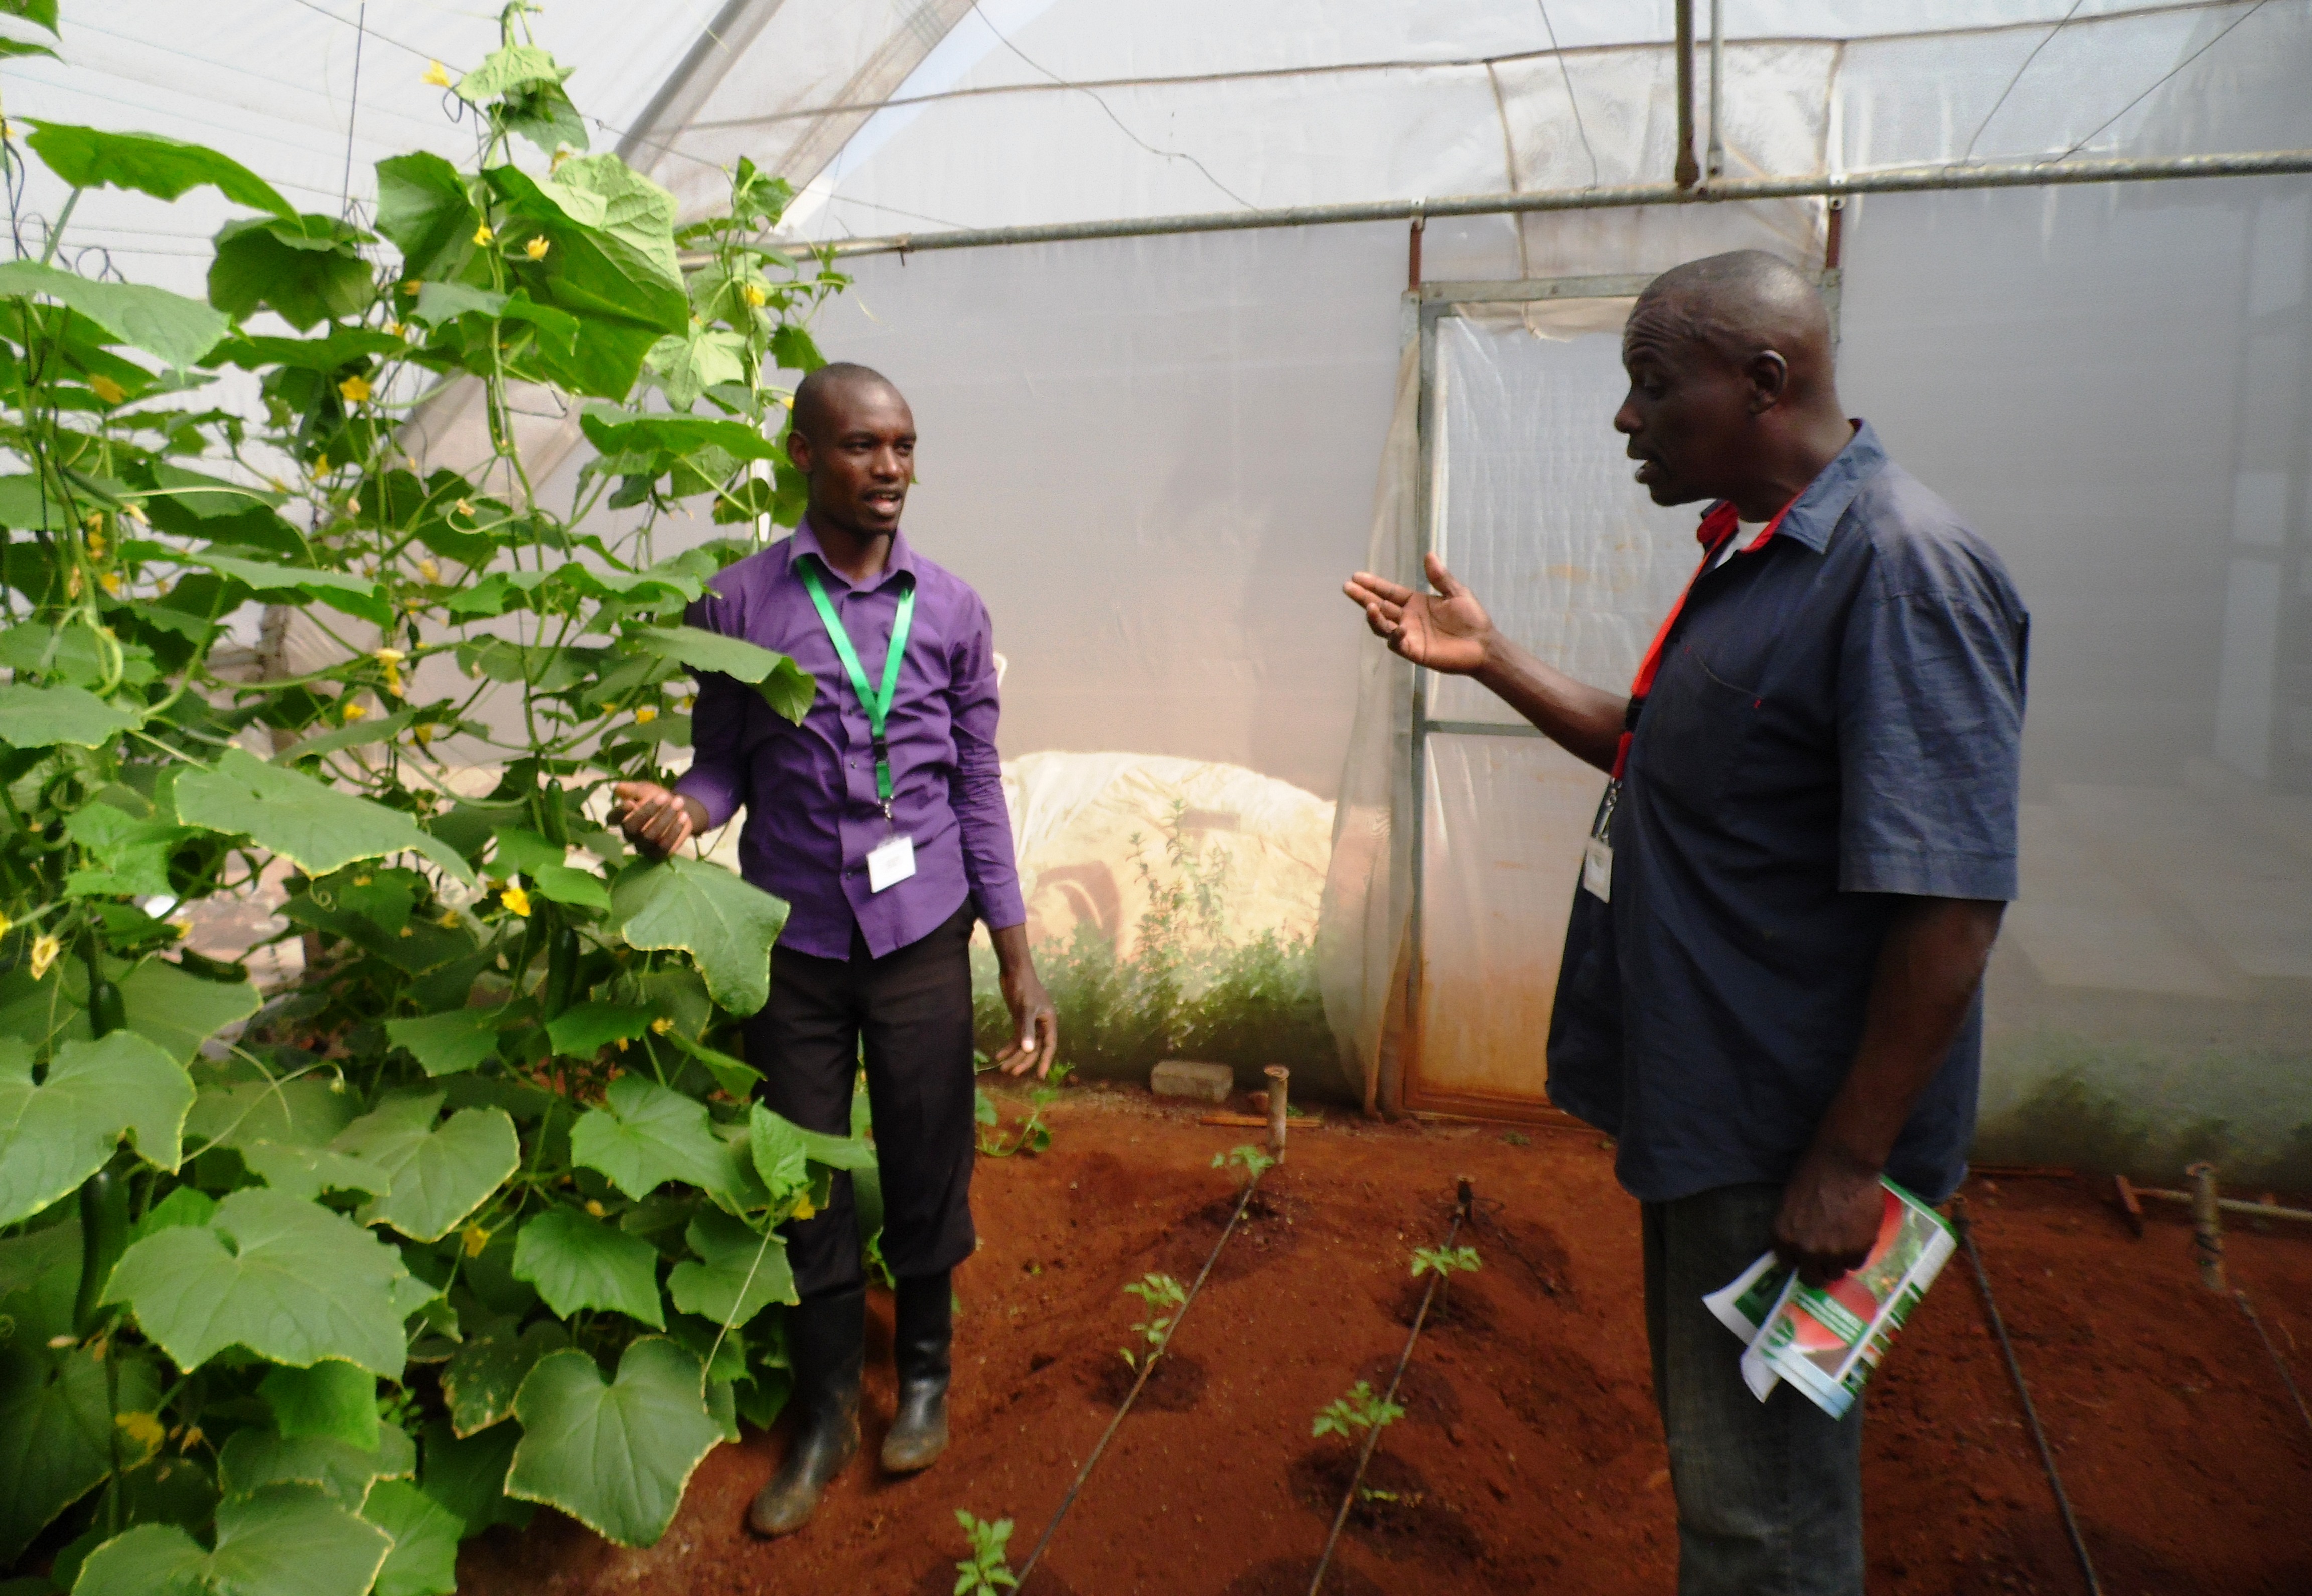 Agronomist Wycliffe Obwoge answering Gabriel Njoroge on how to raise cucumbers. Accidental tomato growing saved the farmer from Sh300,000 poultry loss. PHOTO: LABAN ROBERT.